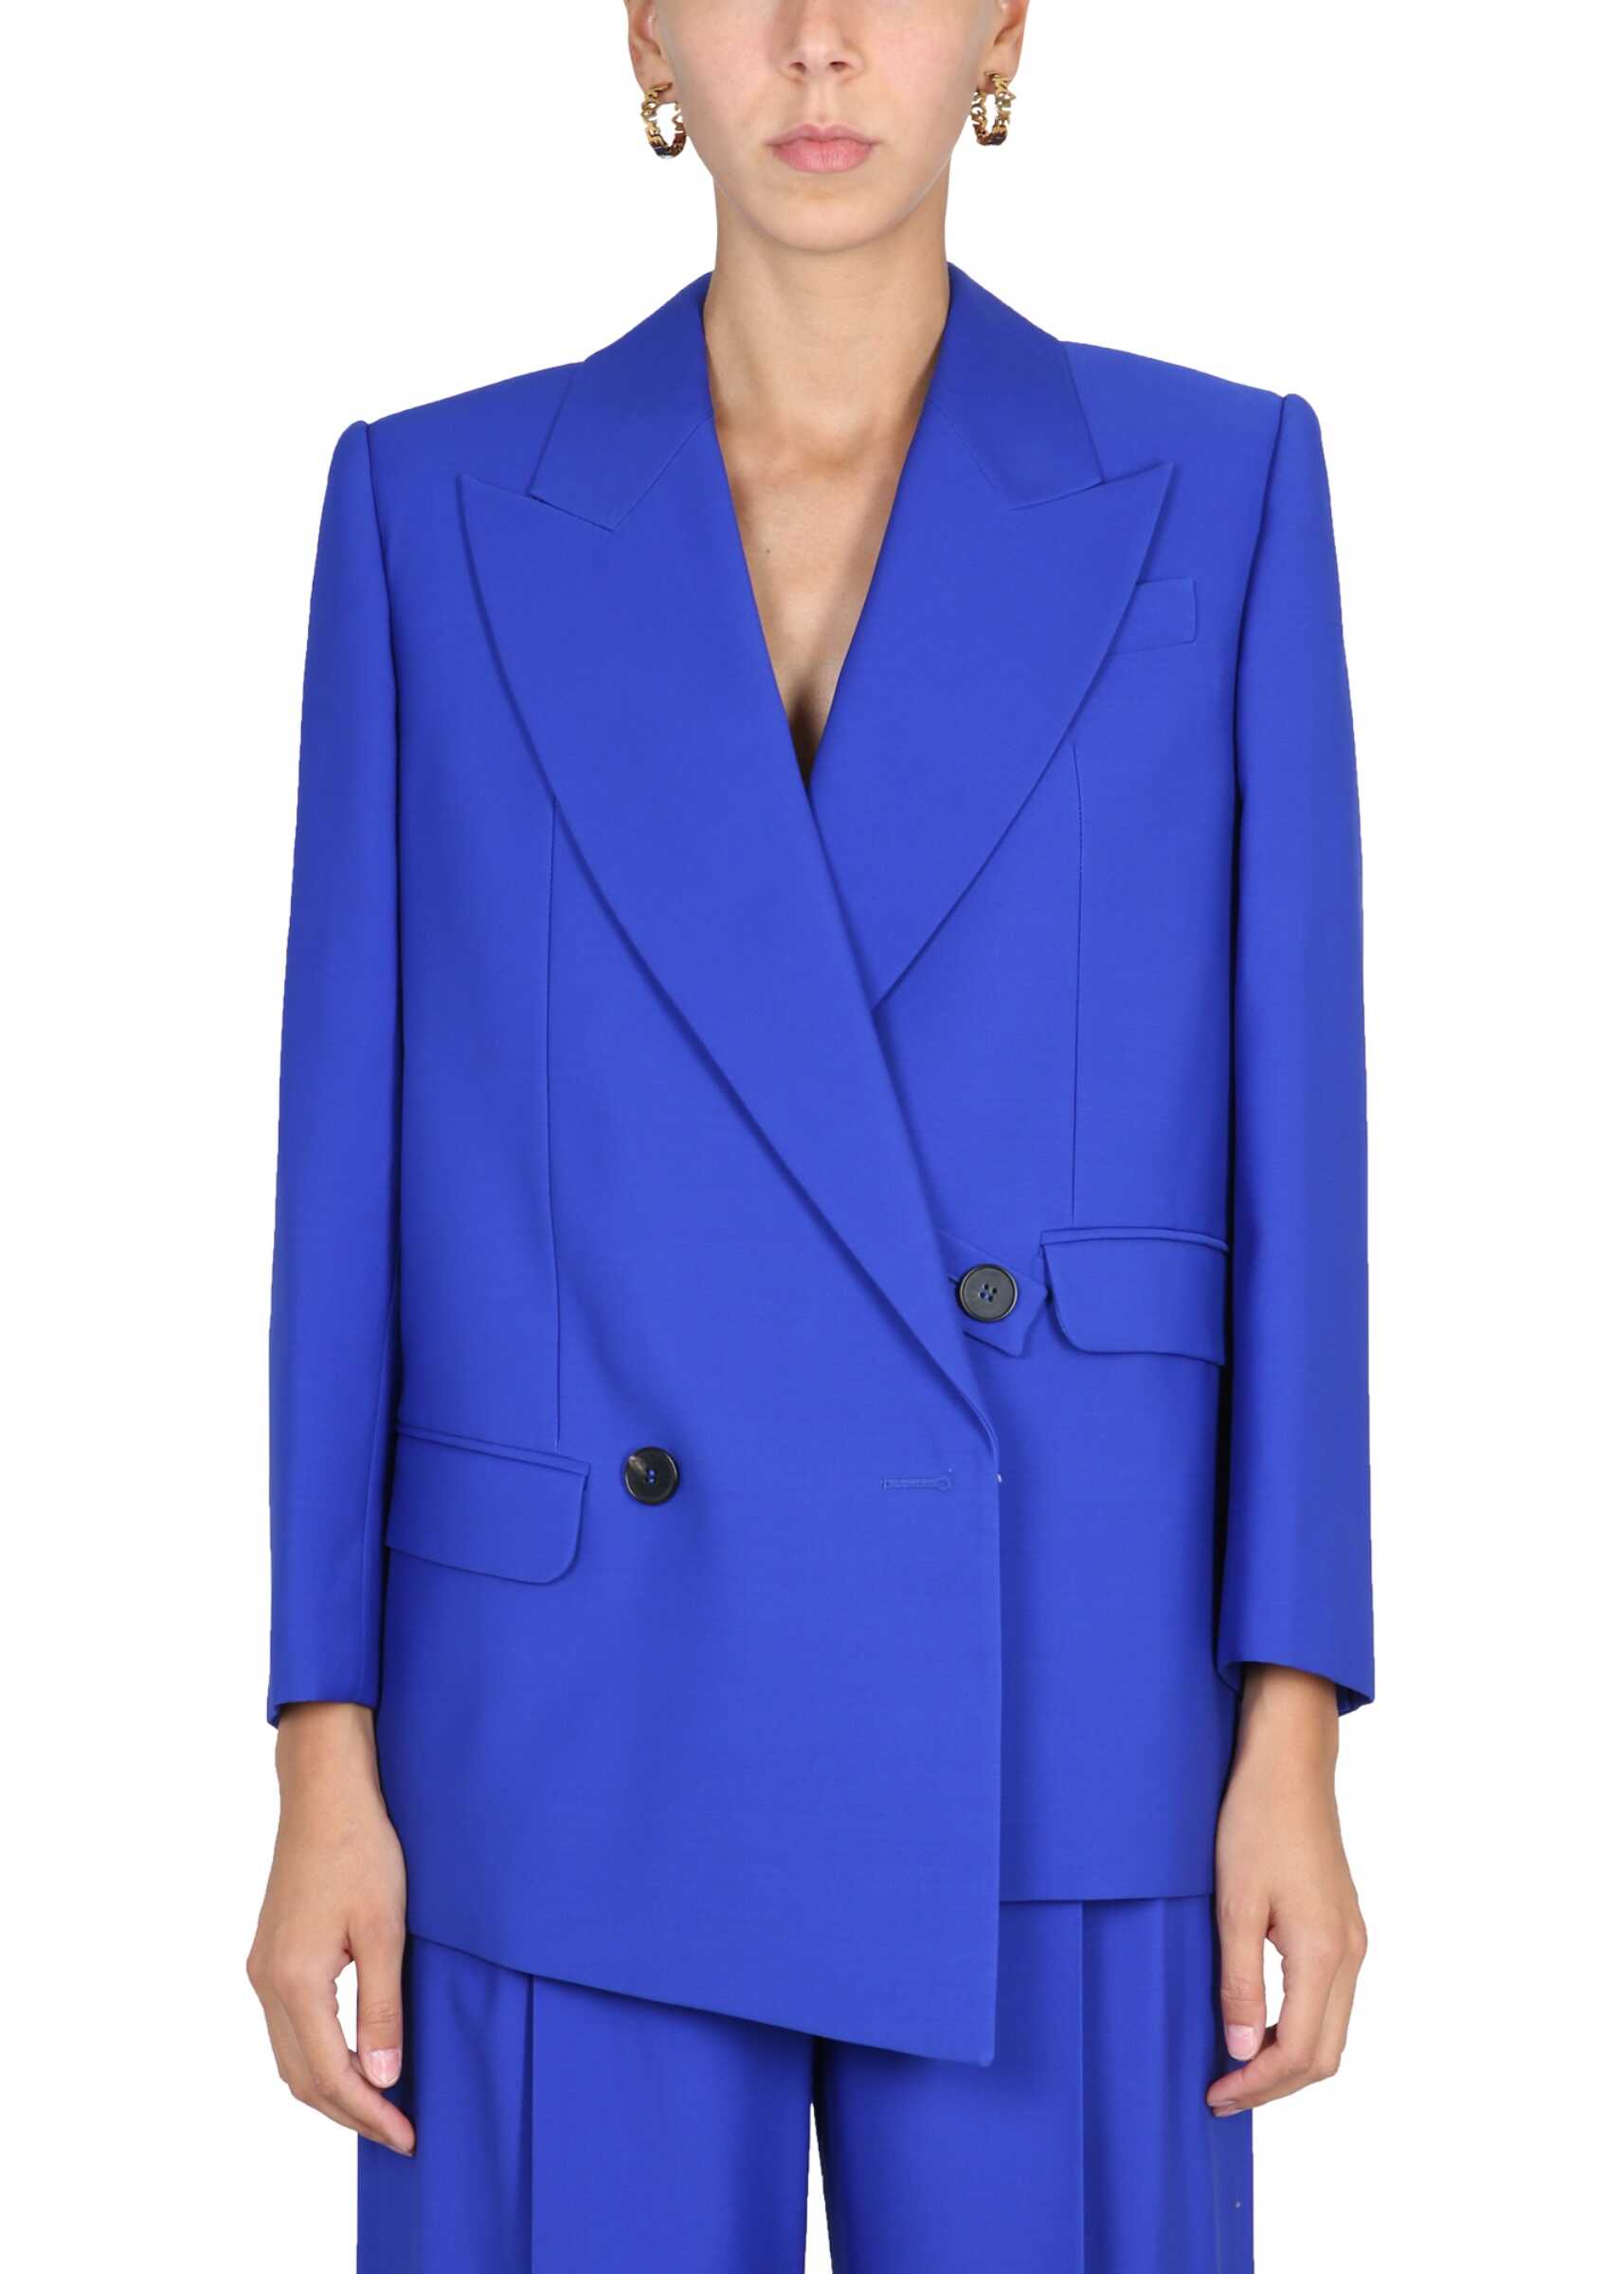 Alexander McQueen Structured Double-Breasted Jacket BLUE